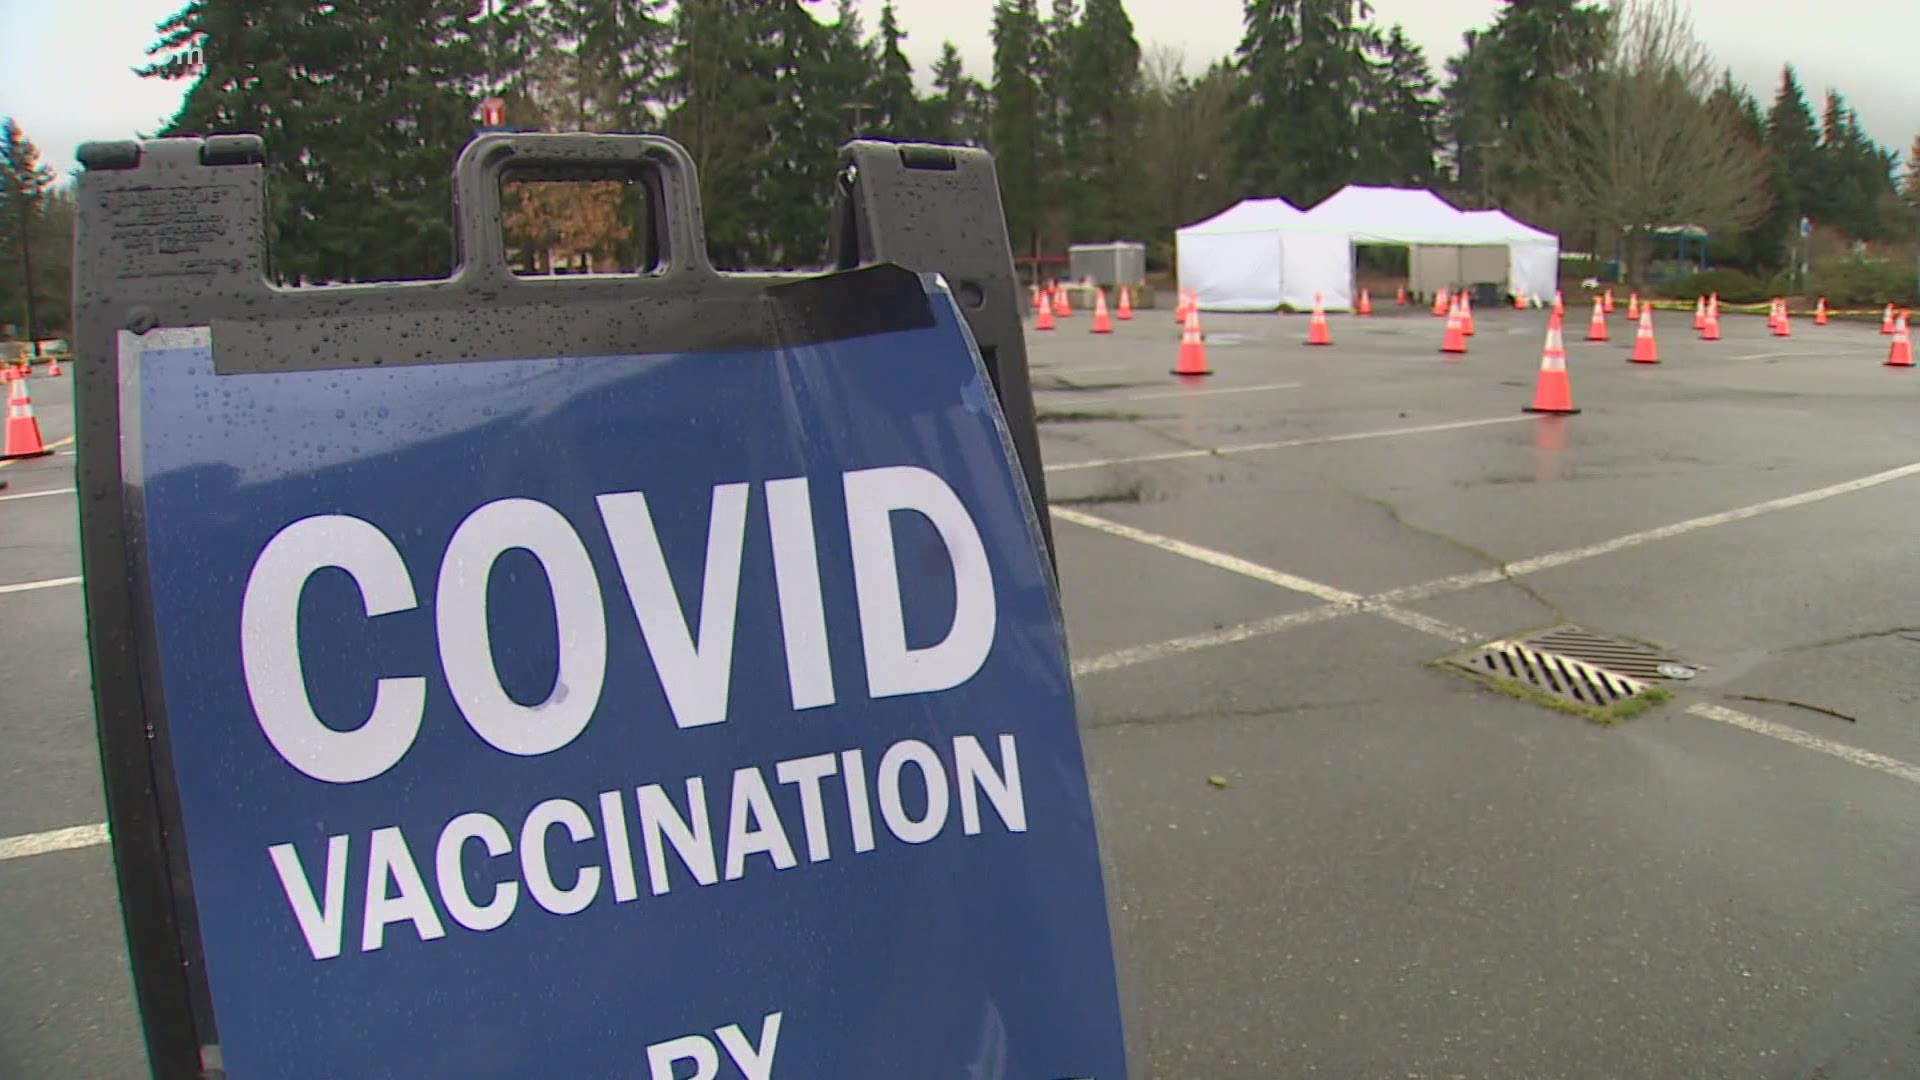 Several vaccine clinics in Washington had to cancel appointments after 90% of the state's vaccine shipments were delayed because of inclement weather.